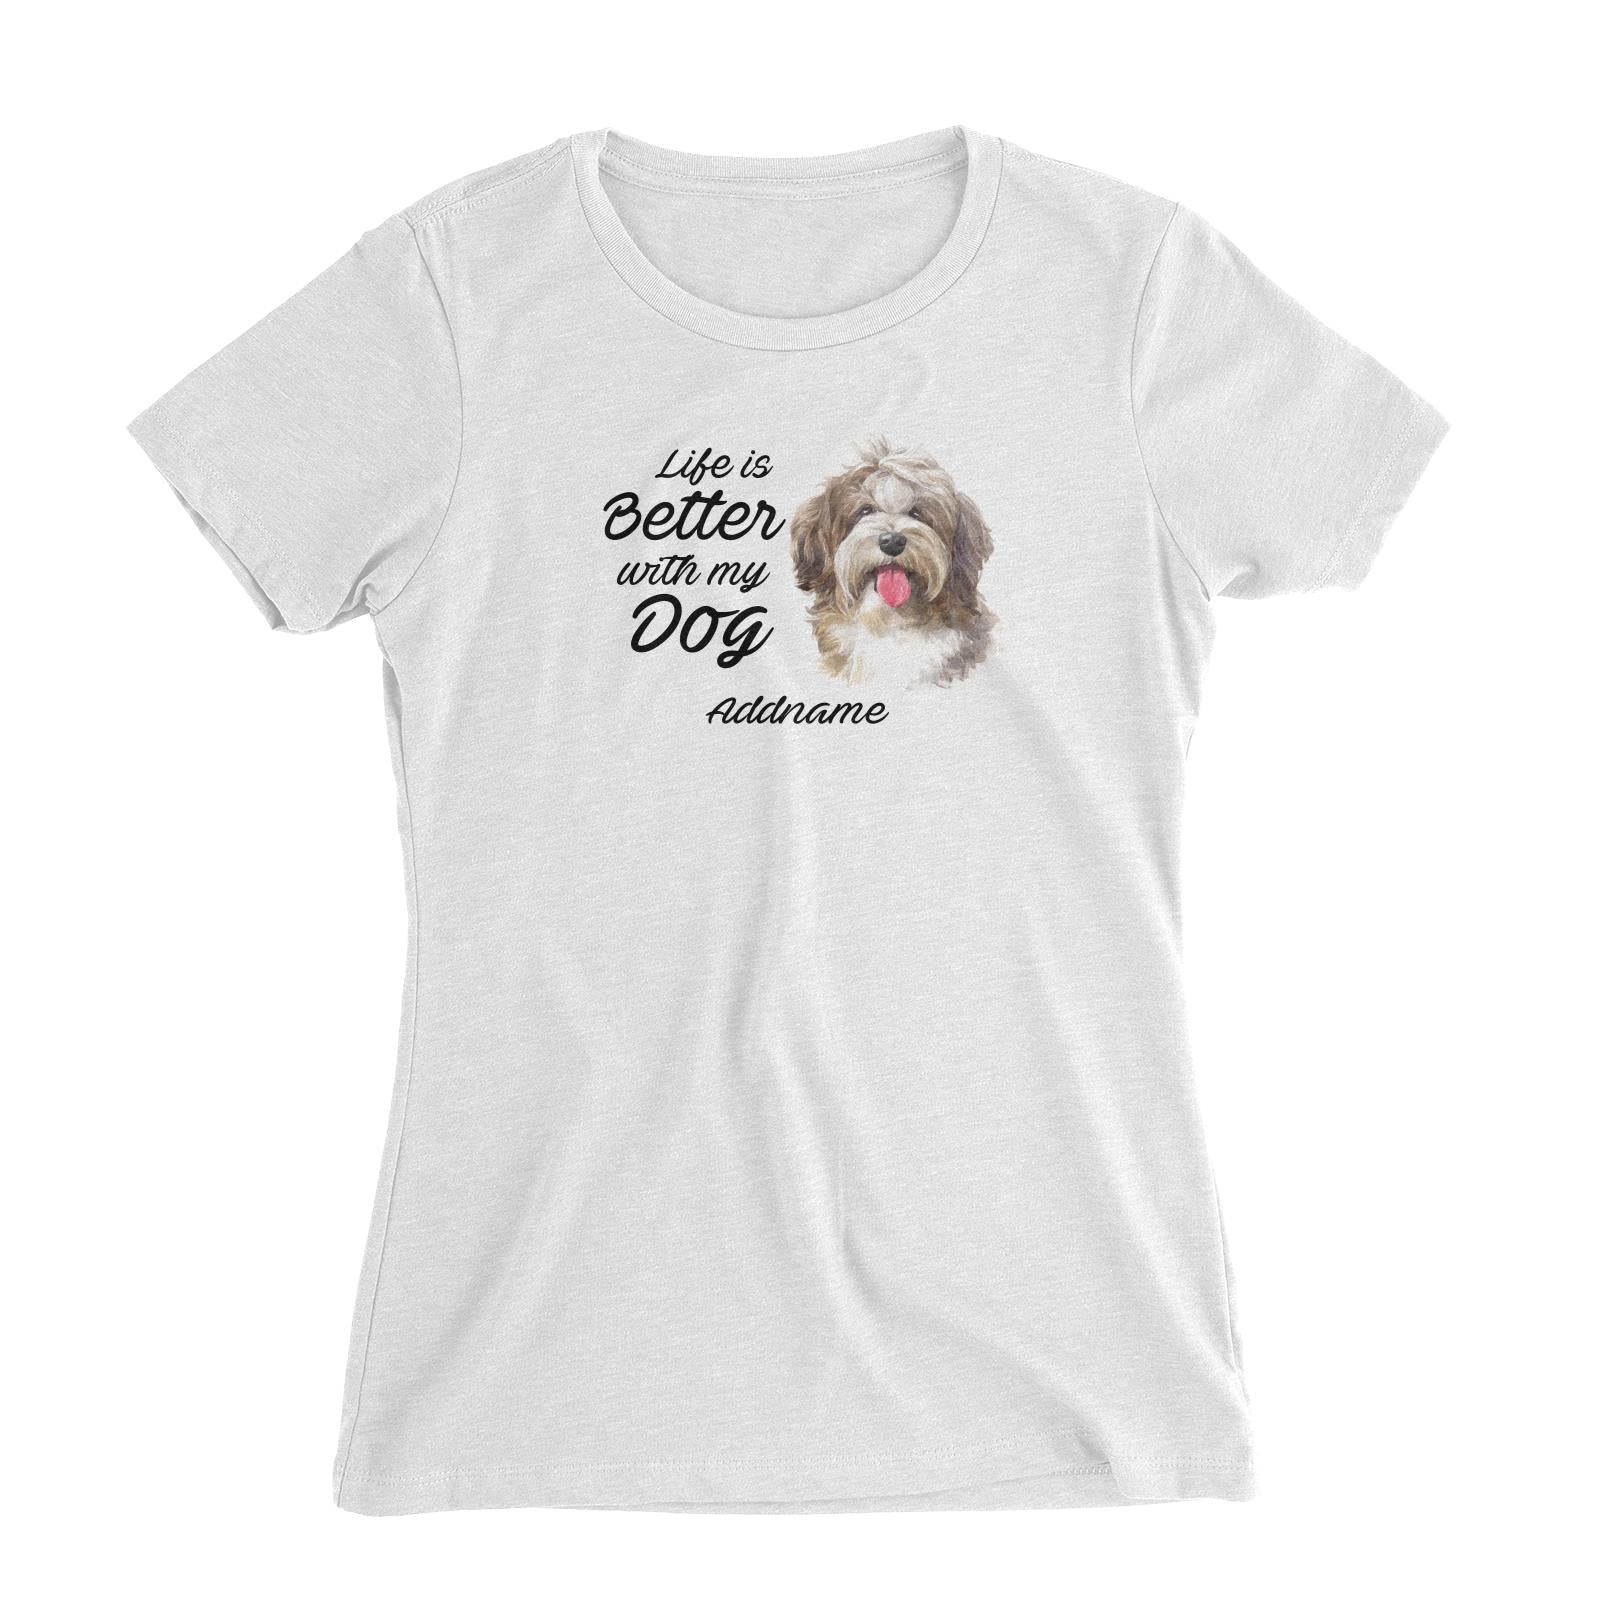 Watercolor Life is Better With My Dog Shaggy Havanese Addname Women's Slim Fit T-Shirt